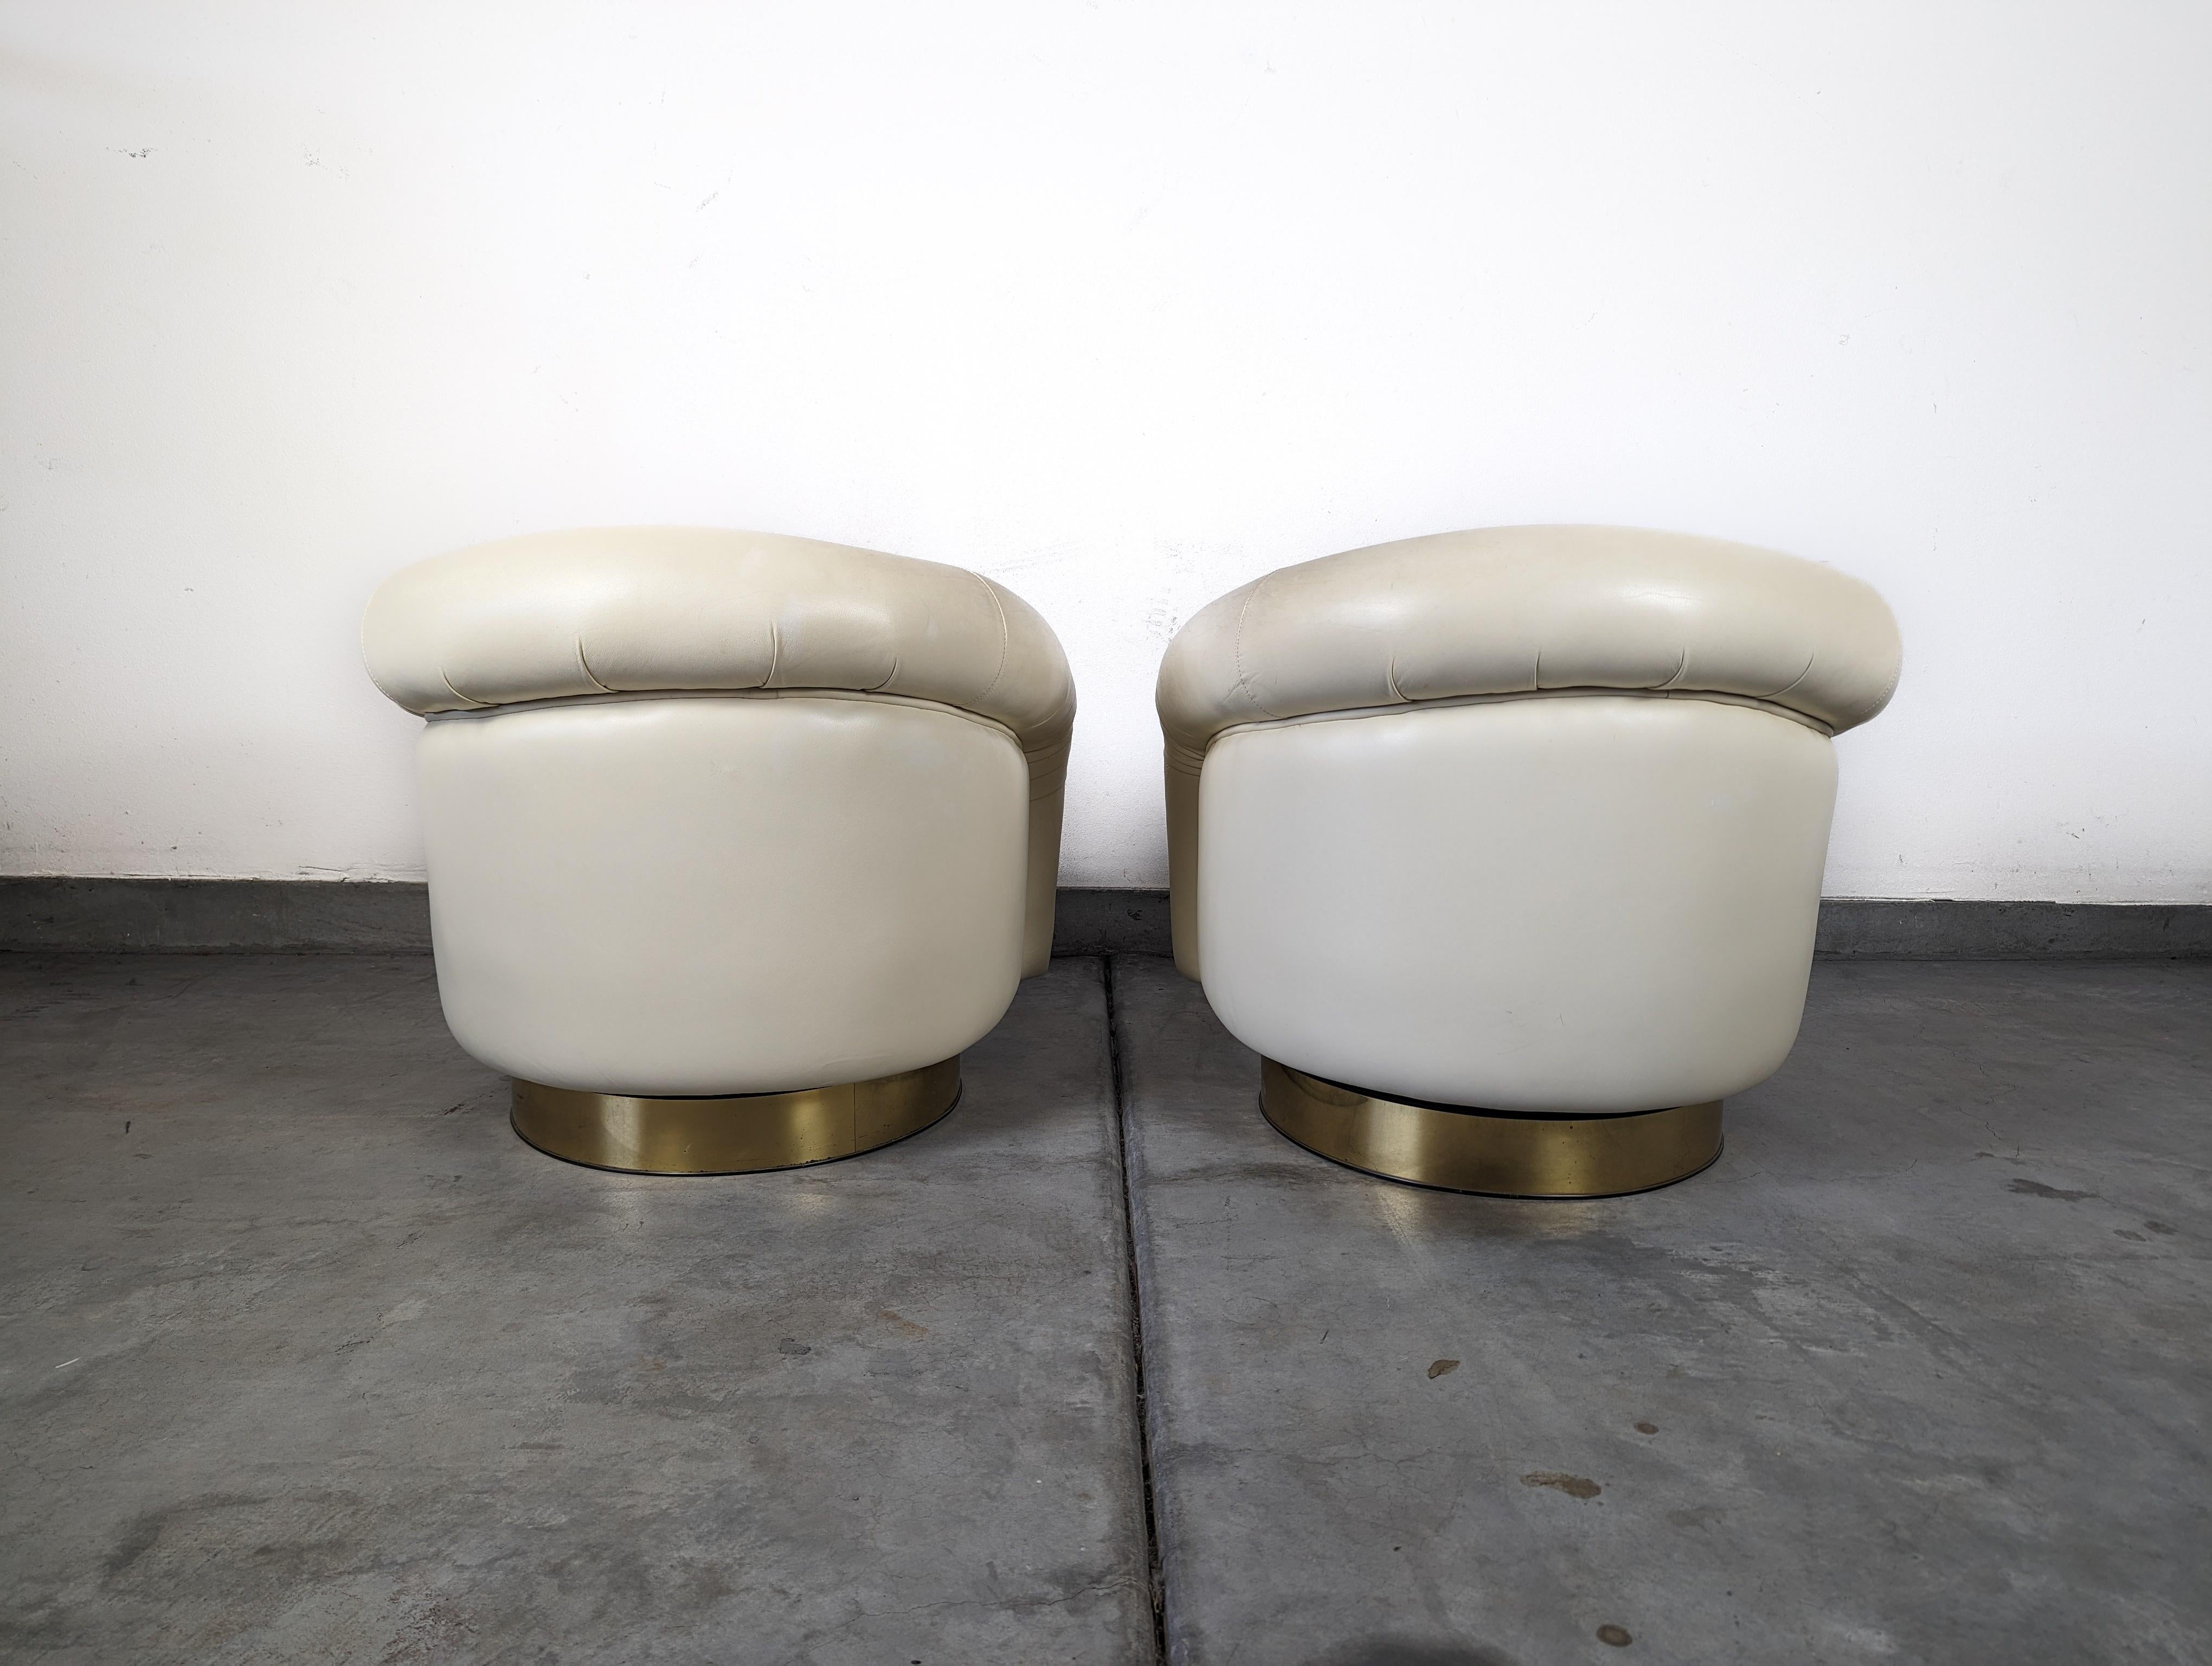 Leather Tilt Swivel Lounge Chairs by Milo Baughman for Thayer Coggin, c1970s In Good Condition For Sale In Chino Hills, CA